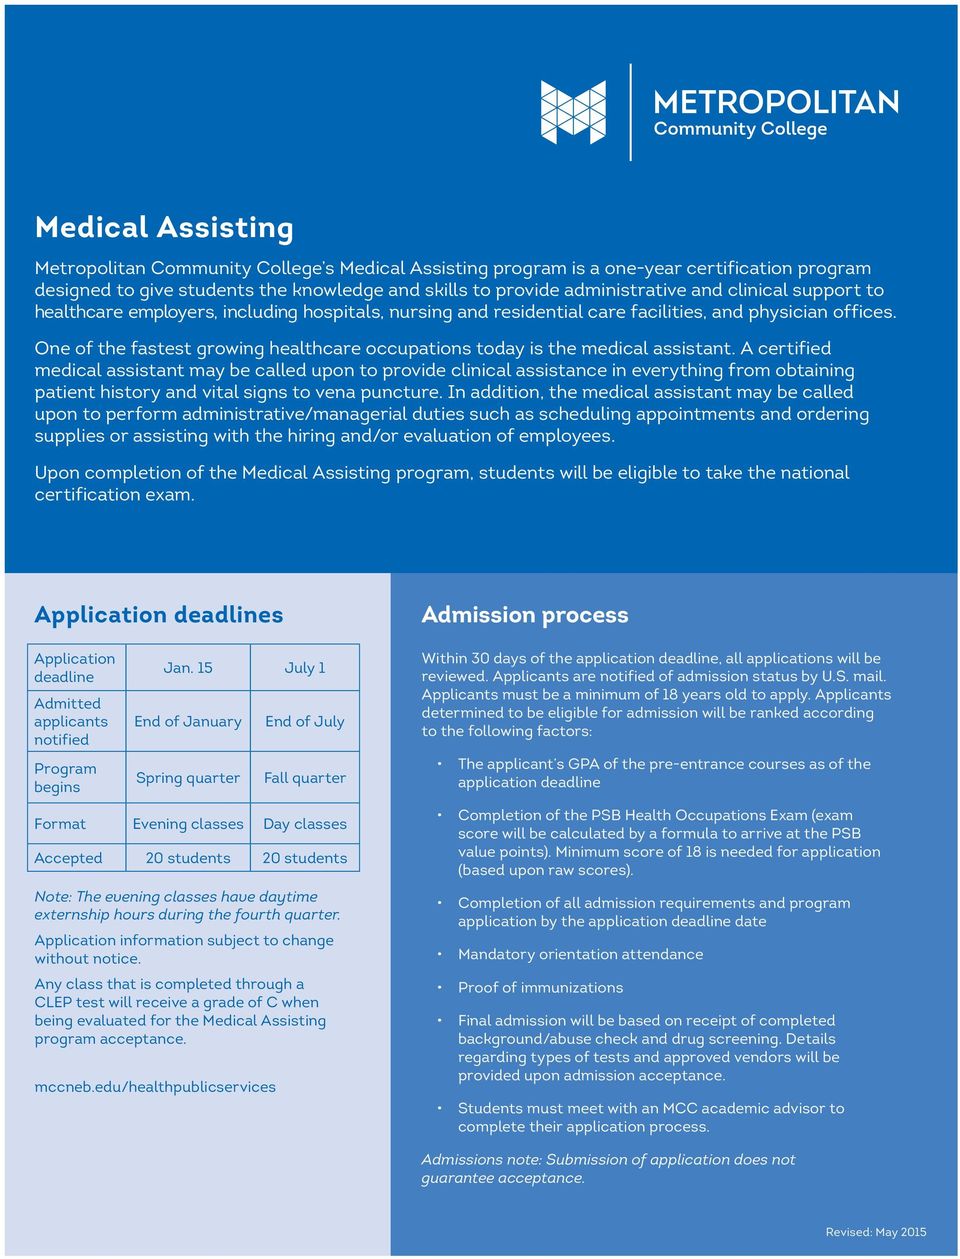 One of the fastest growing healthcare occupations today is the medical assistant.